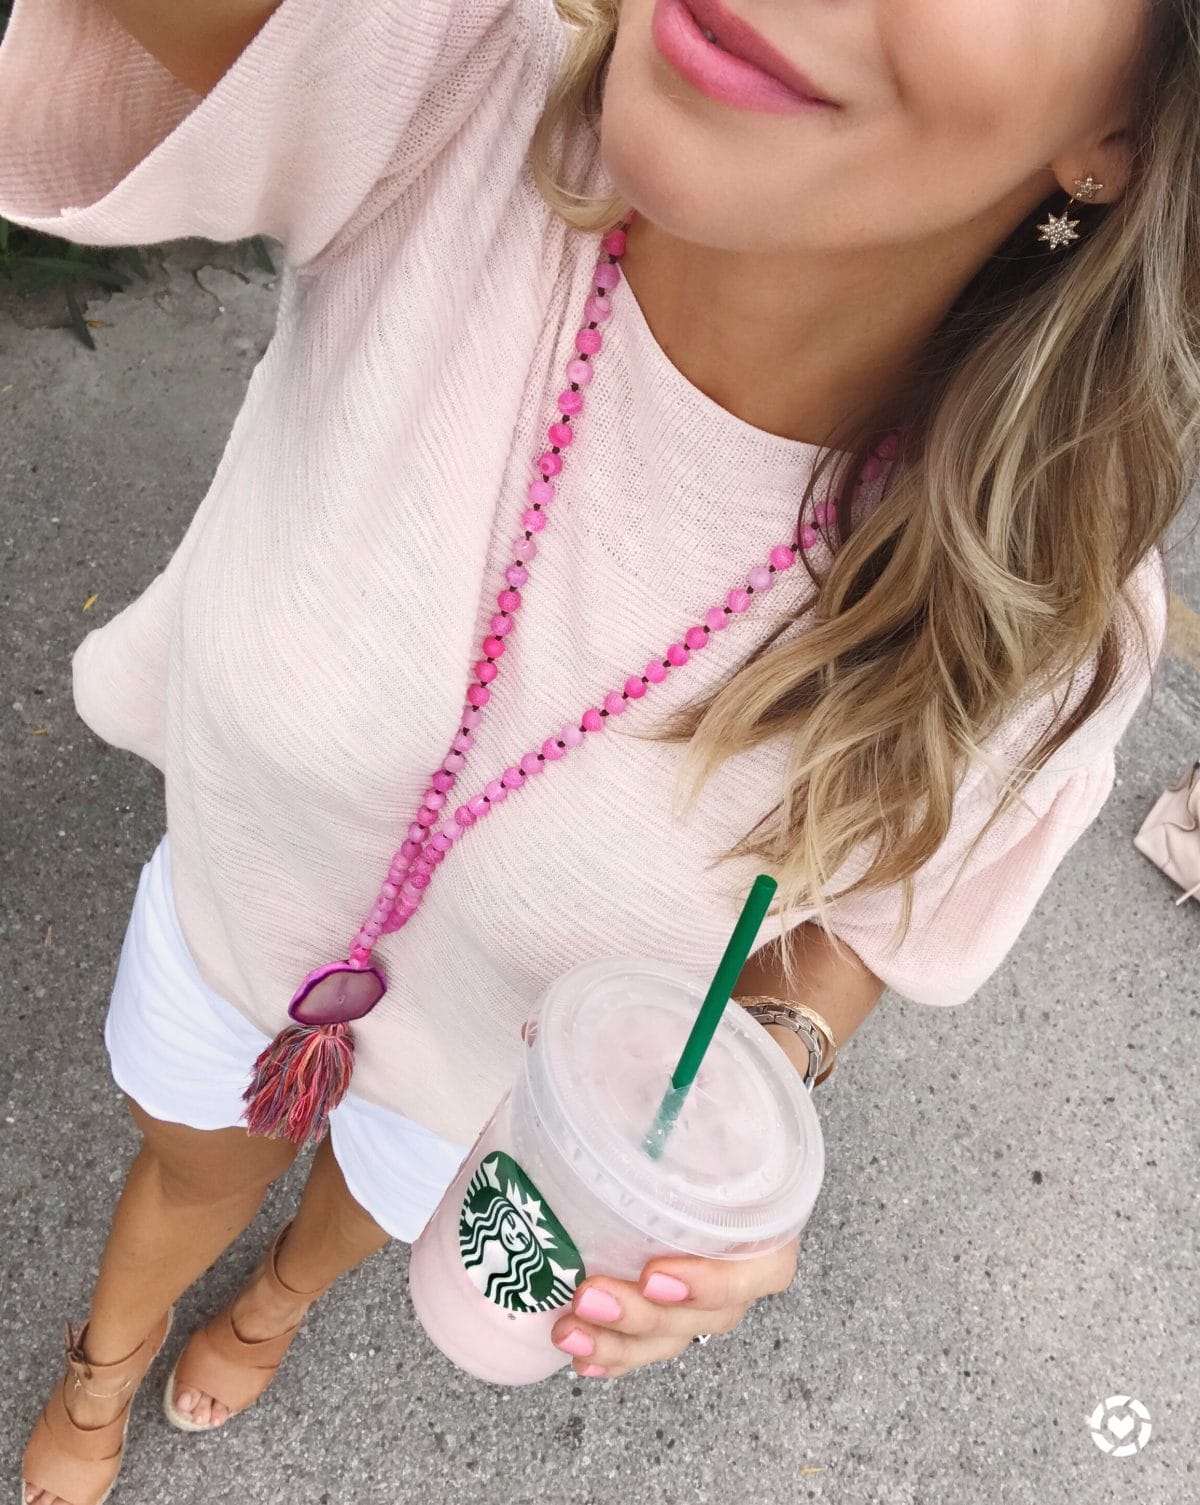 Spring outfit - pink flutter sleeve top and white shorts